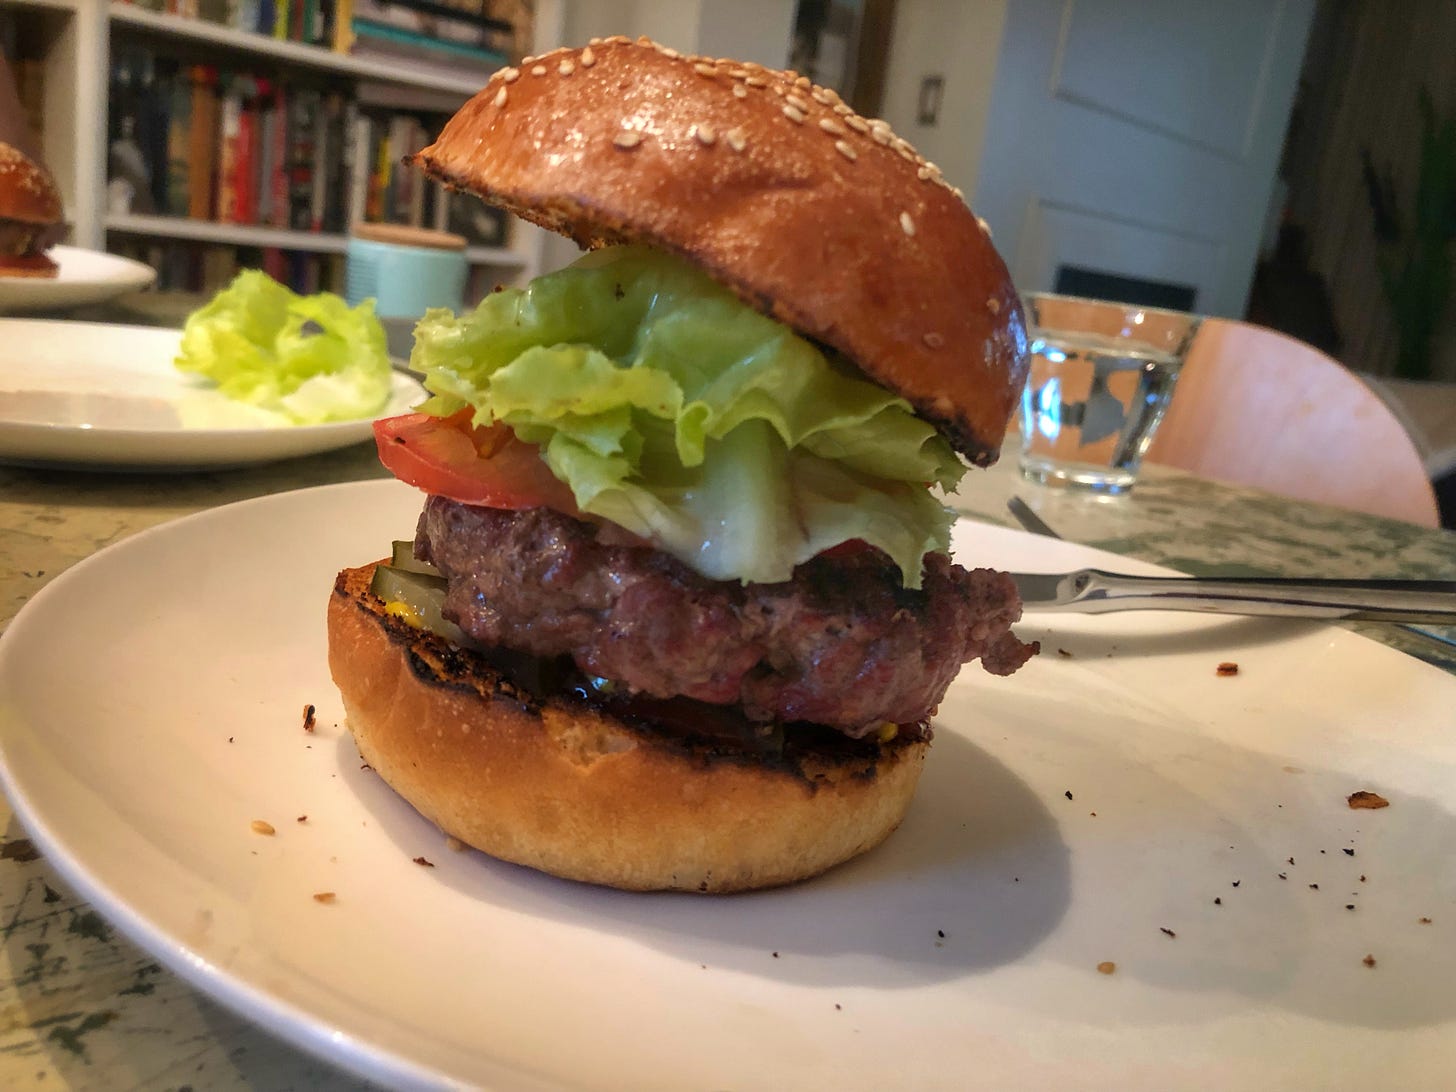 A dinner plate with a burger on a sesame seed bun, piled high with lettuce and tomato. It is far too tall to fit into someone's mouth.